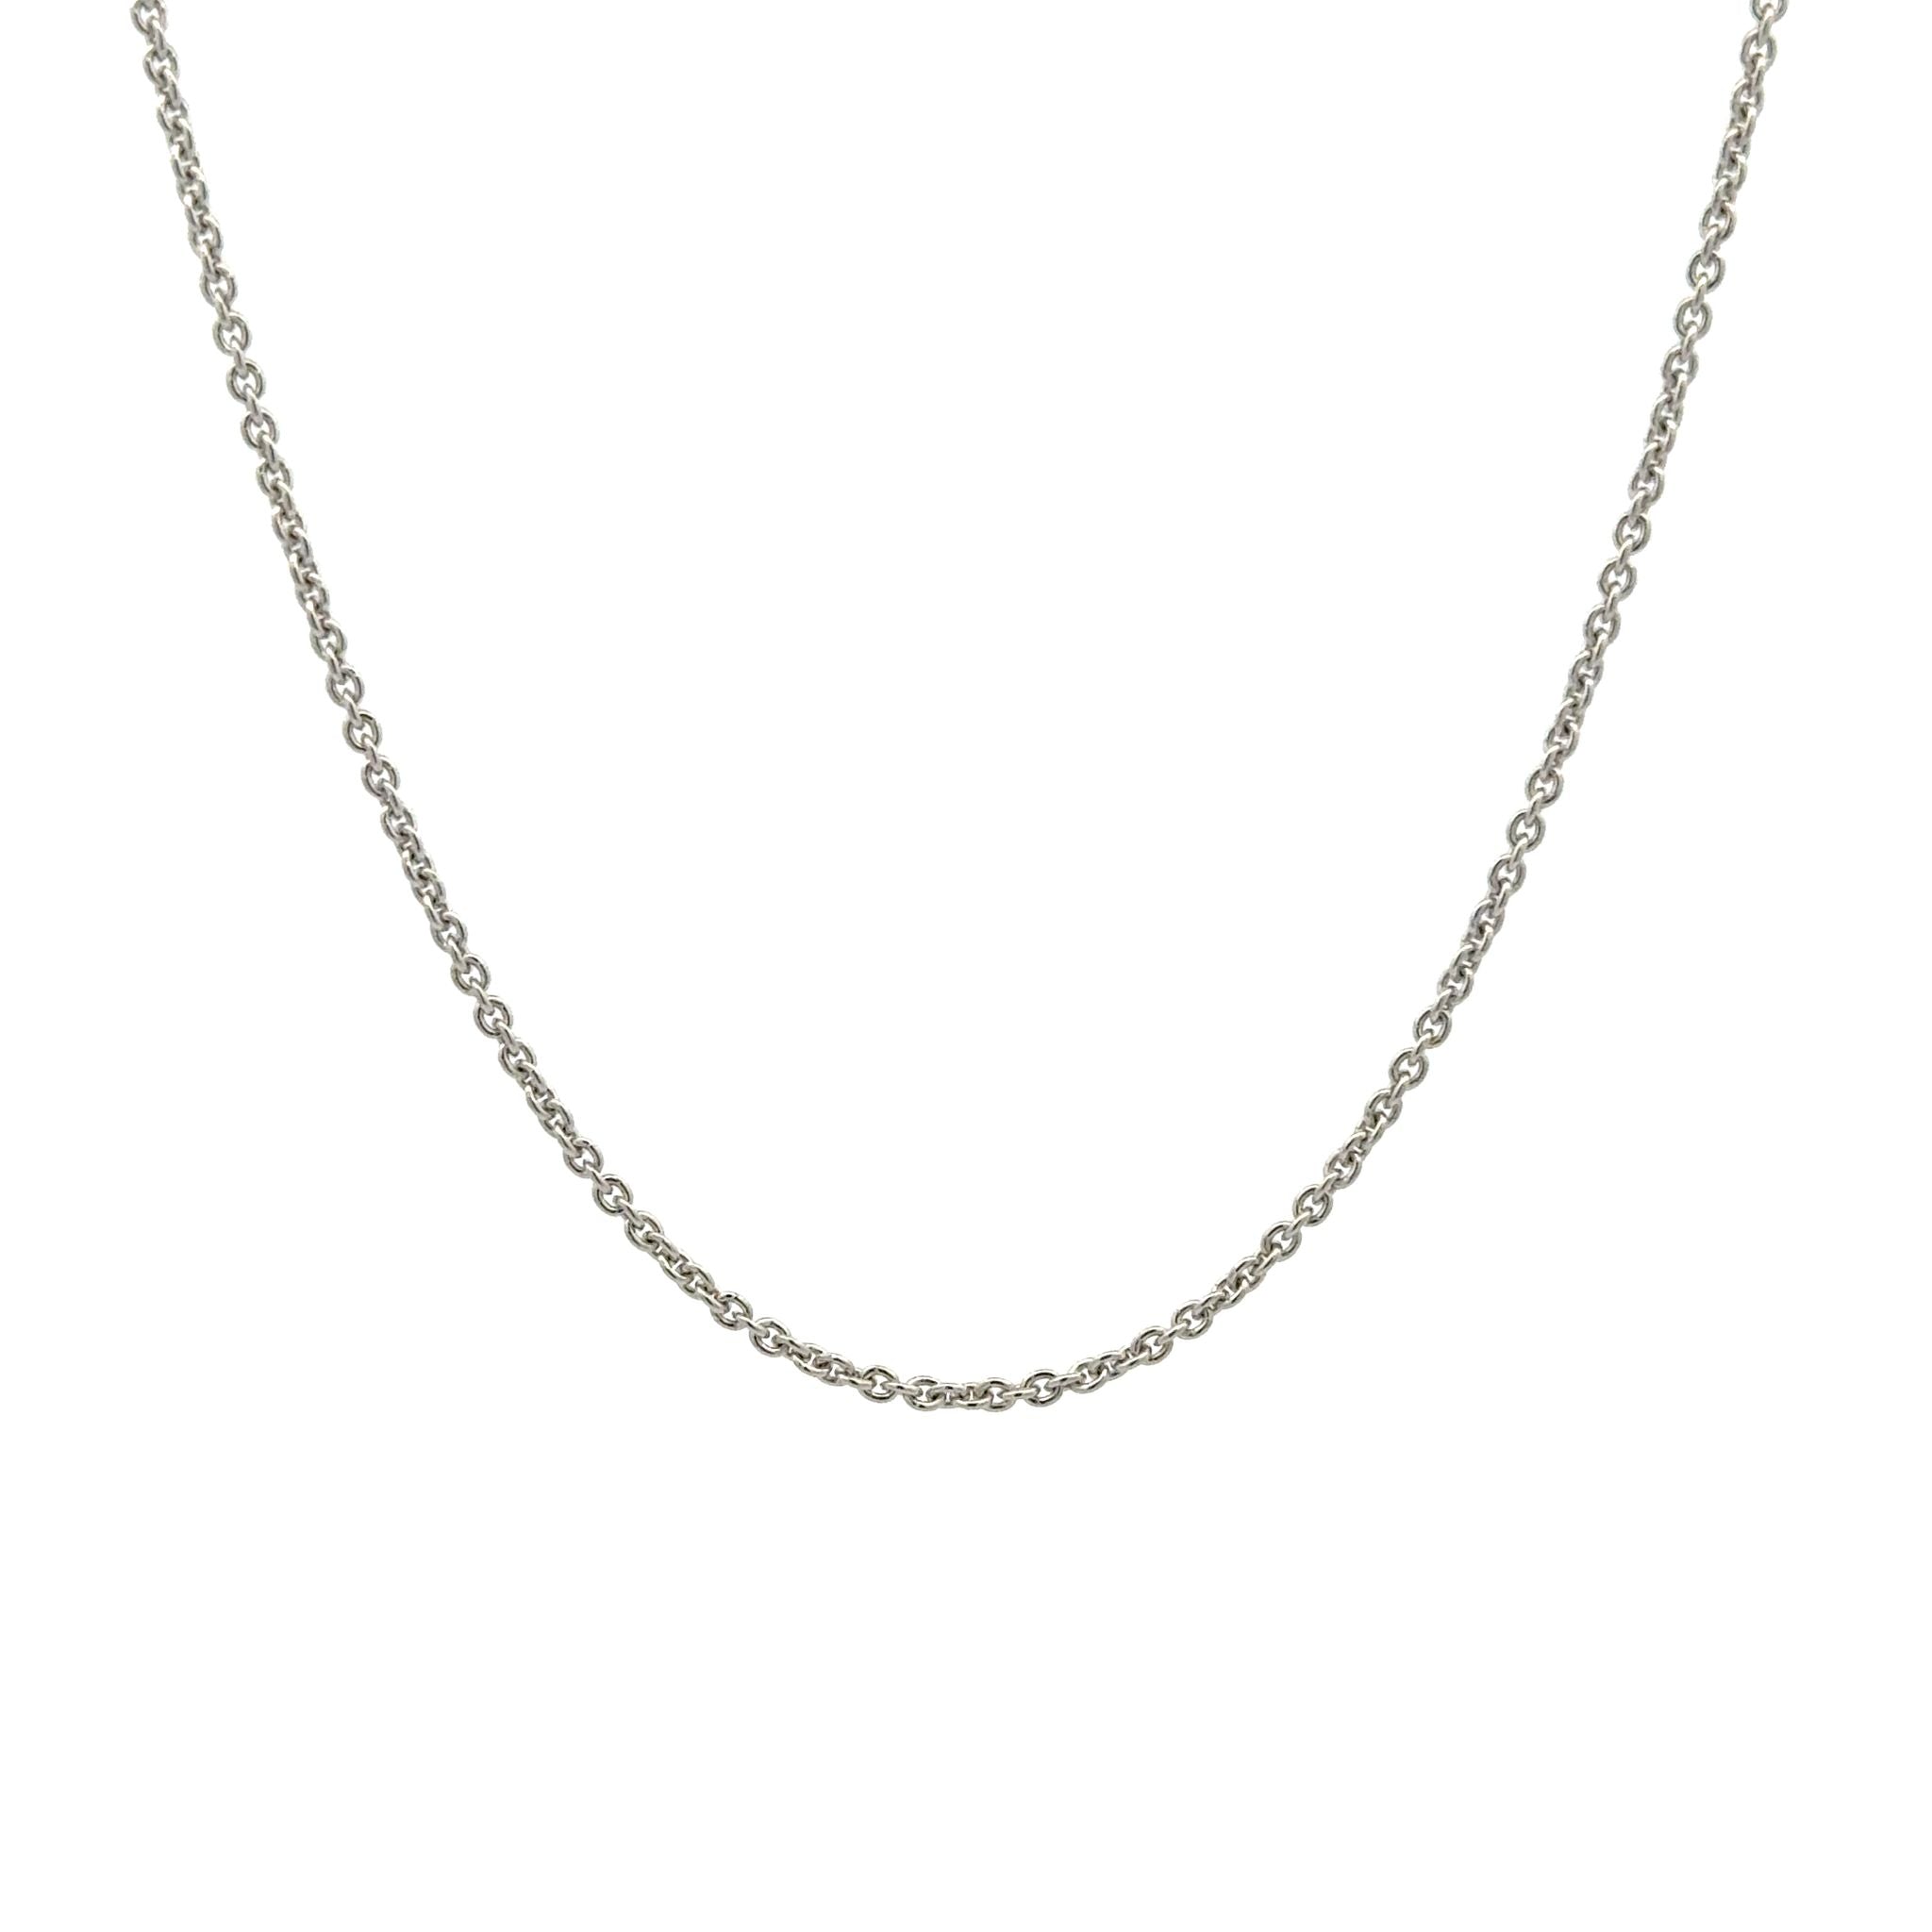 9K White Gold Polished 58cm Adjustable Cable Chain 1.4mm